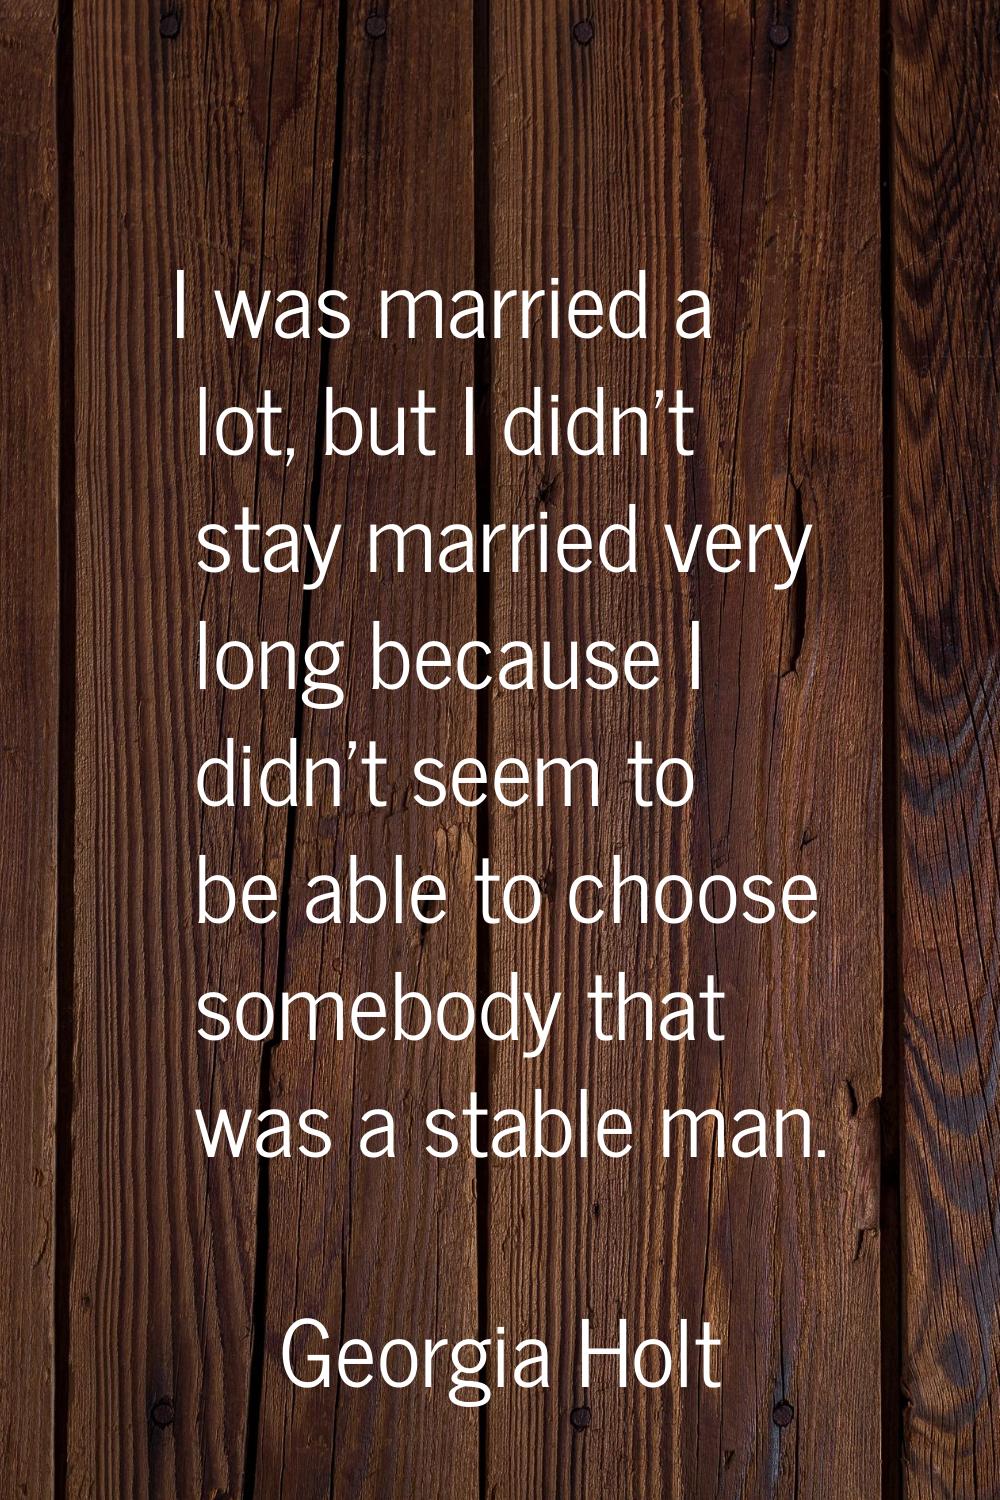 I was married a lot, but I didn't stay married very long because I didn't seem to be able to choose